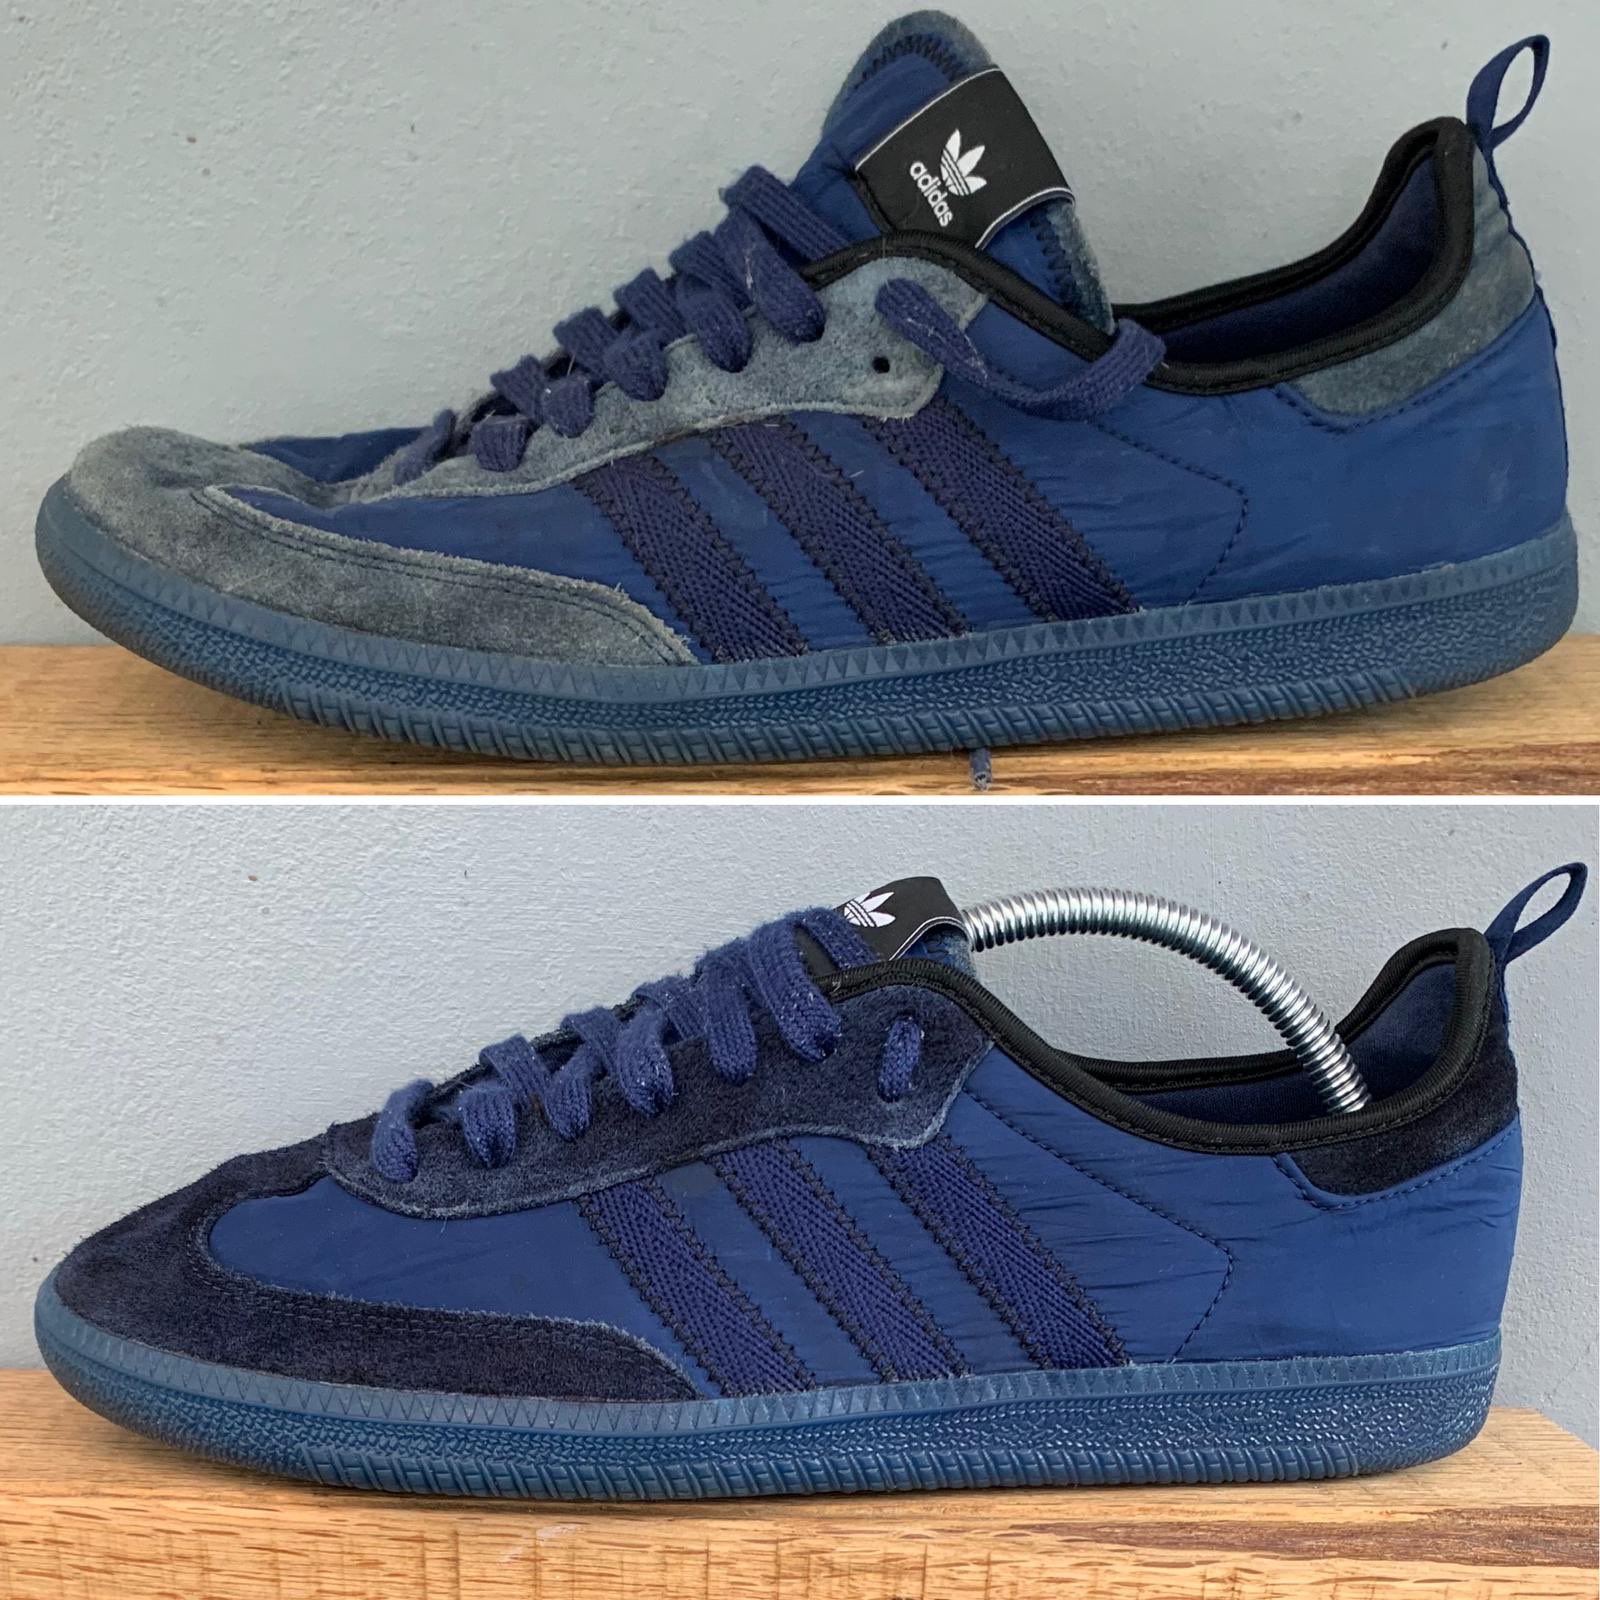 Glistening Kicks on Twitter: "These #adidasxcpcompany tobacco for @Henni_Papenfuss came in us in need of bit of work. A week later and they're good go back to our